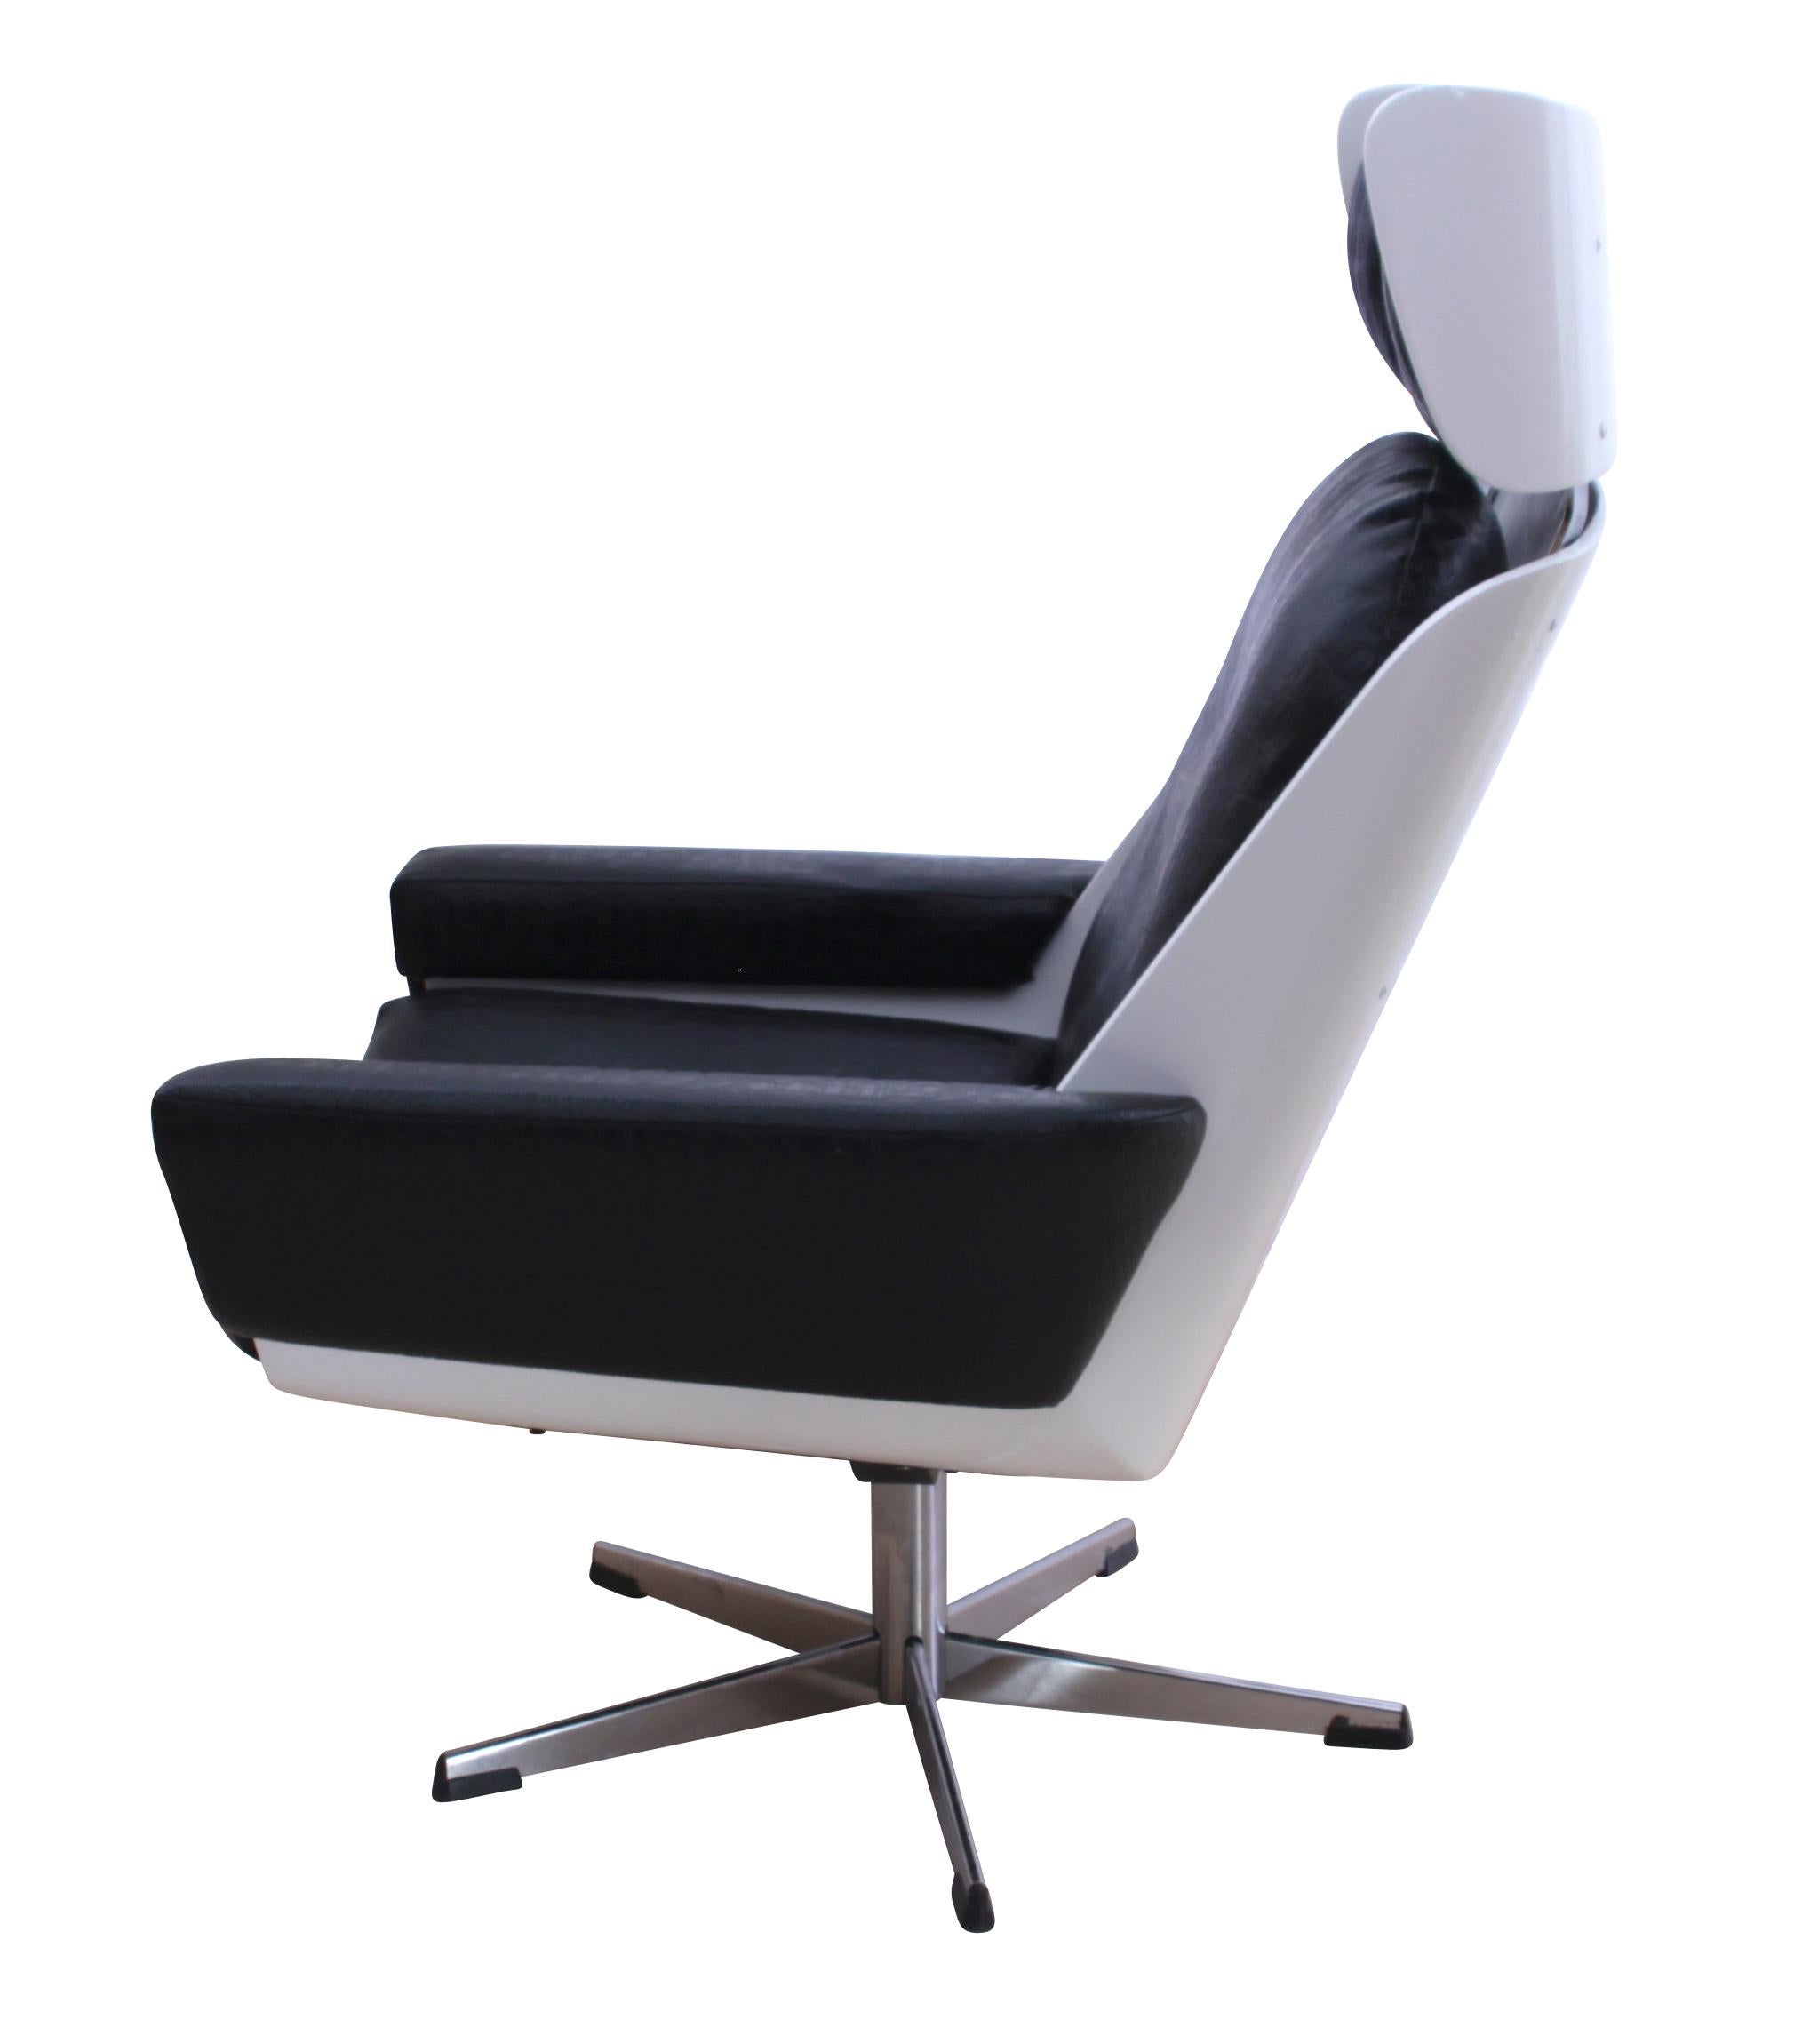 Space Age lounge chair, white lacquer, faux leather in reptile look, Germany, 1970s

Extraordinary rare design lounge chair from Germany, 1970s (Verner Panton Era style, Space Age)
White lacquered wood with backside cuts in for a 'reptile